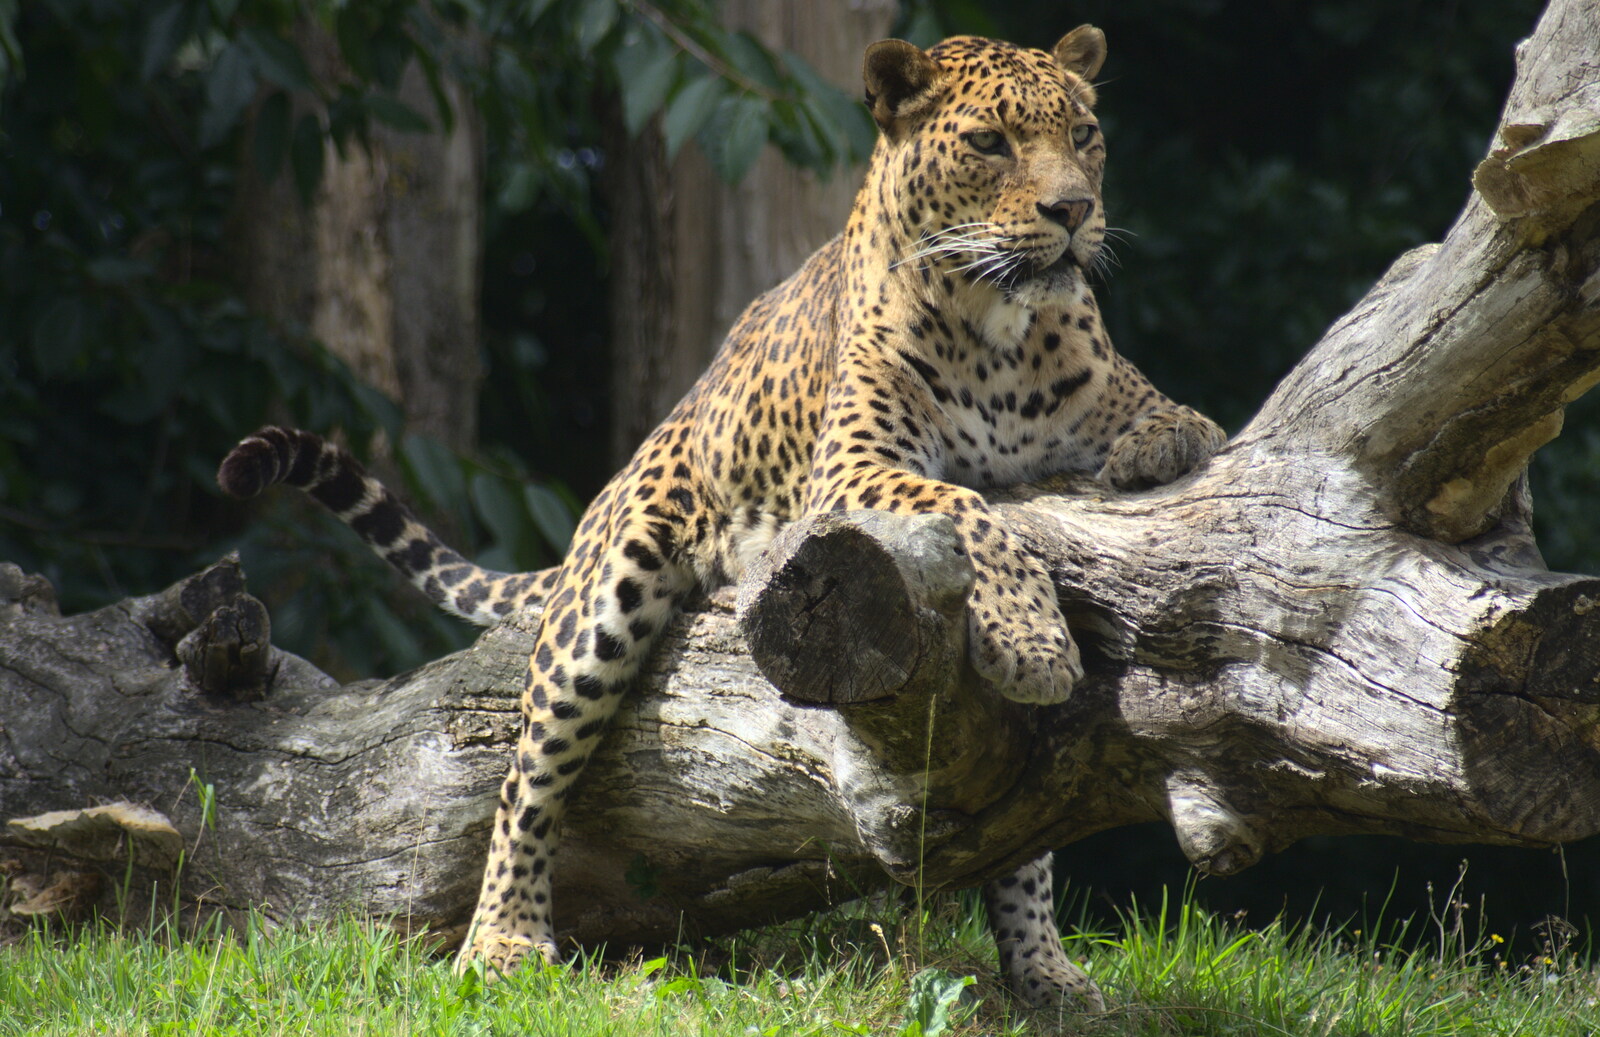 A leopard sits on a tree stump from Tiger Cubs at Banham Zoo, Banham, Norfolk - 6th August 2013